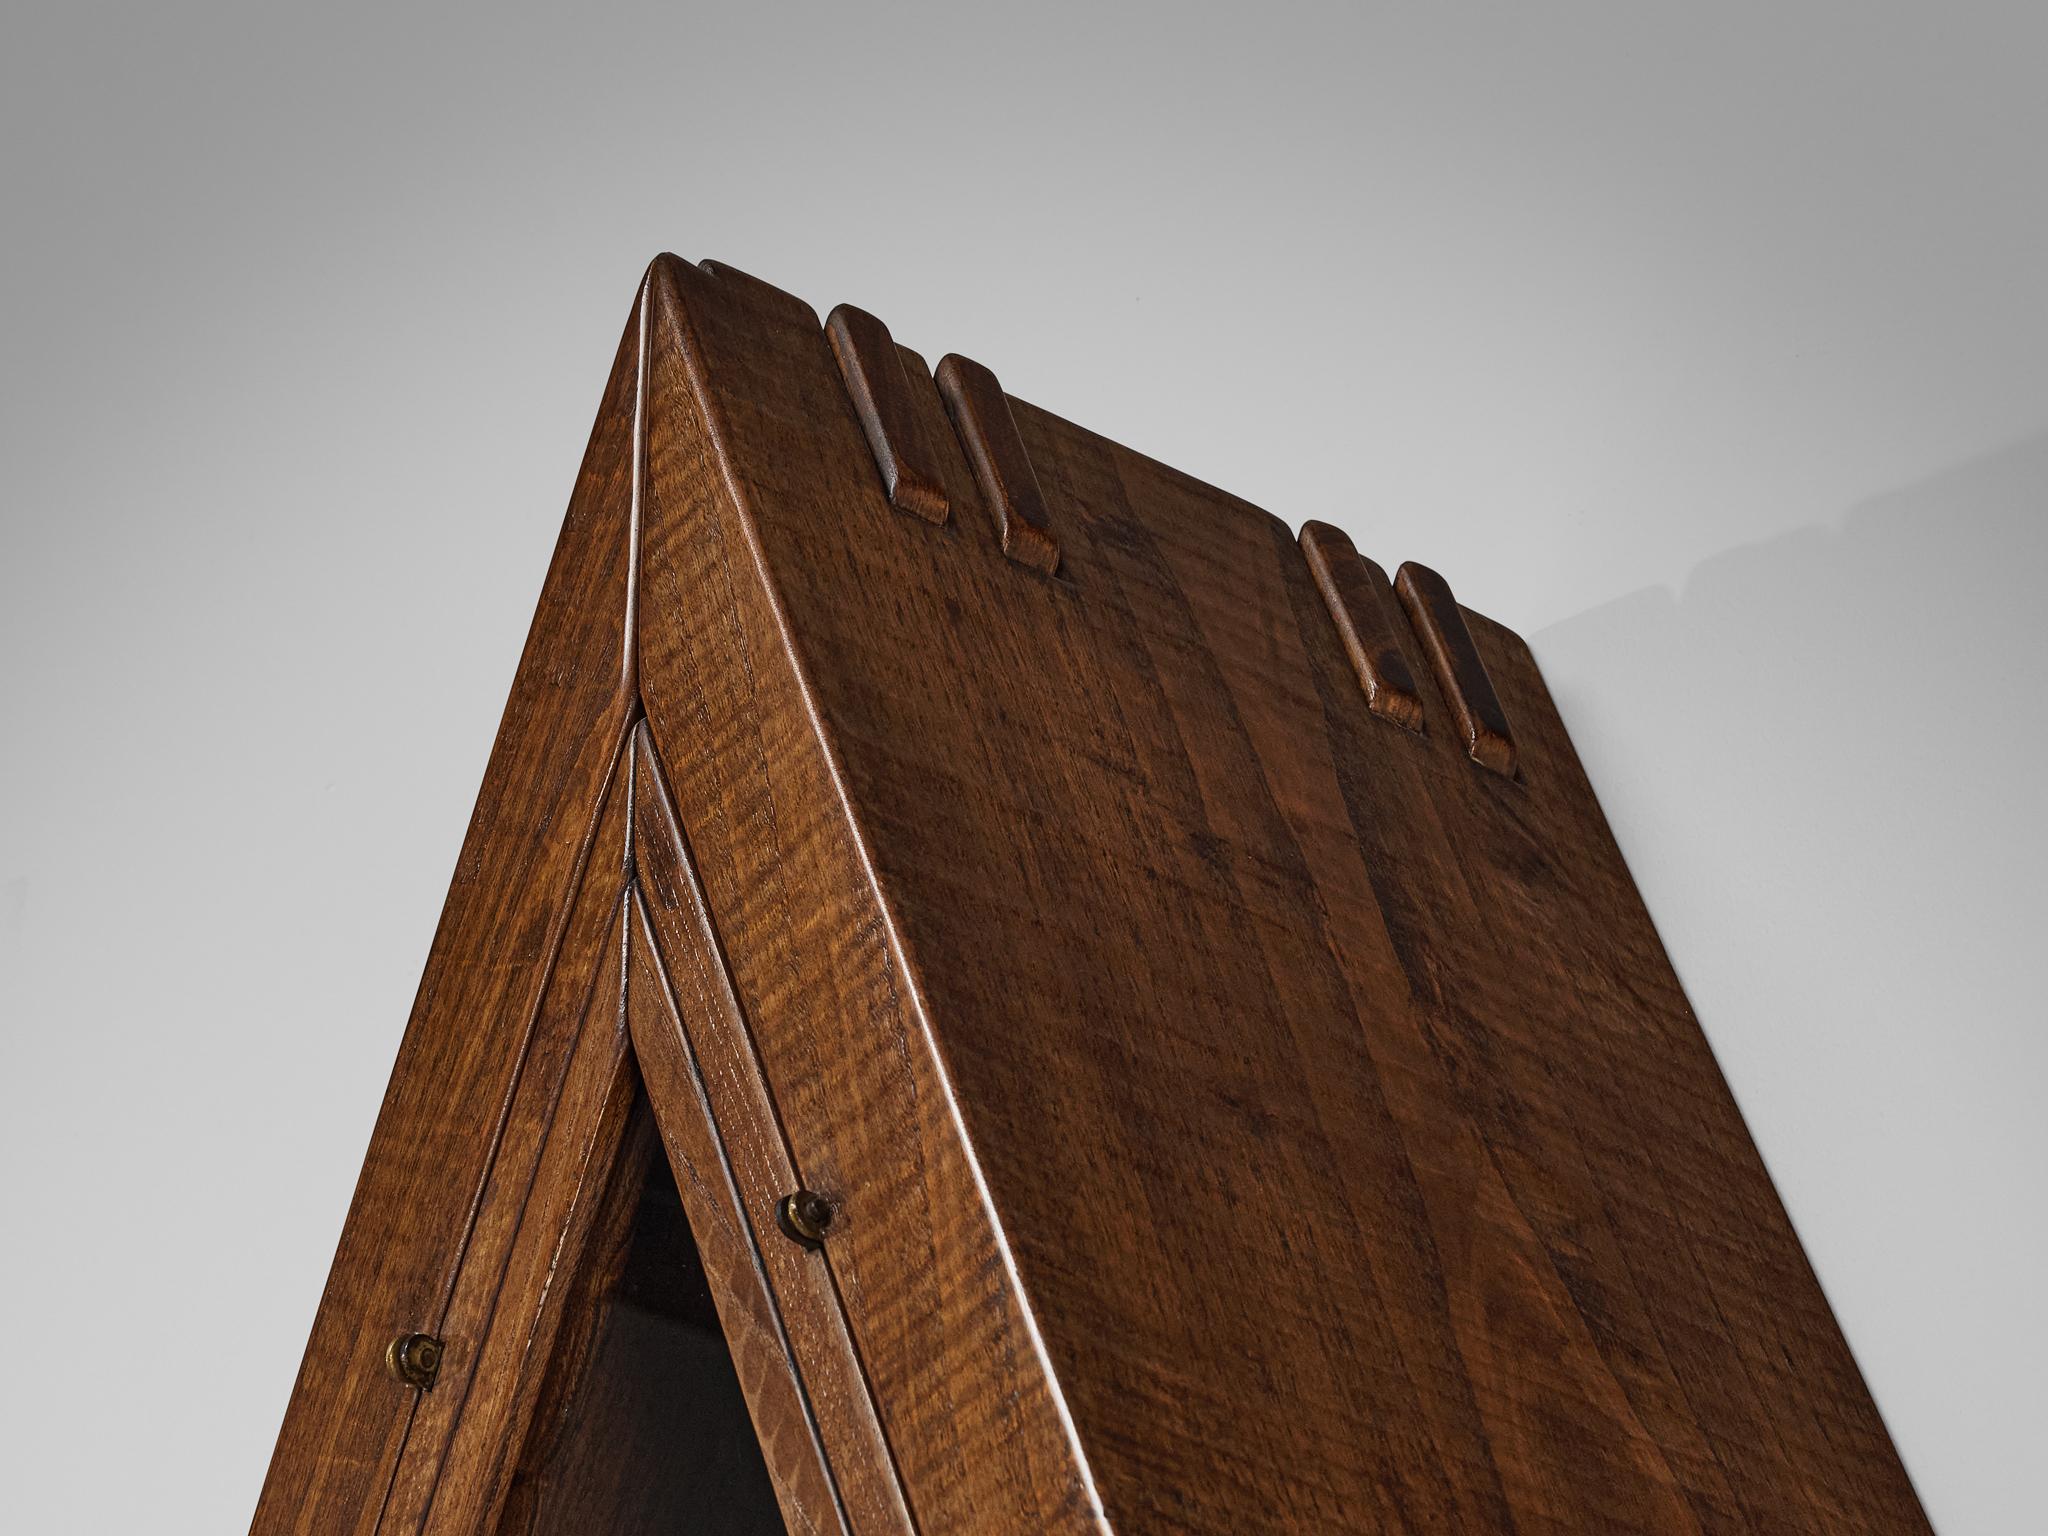 Giuseppe Rivadossi Pyramid Shaped Cabinet in Chestnut 8.2 feet  For Sale 1